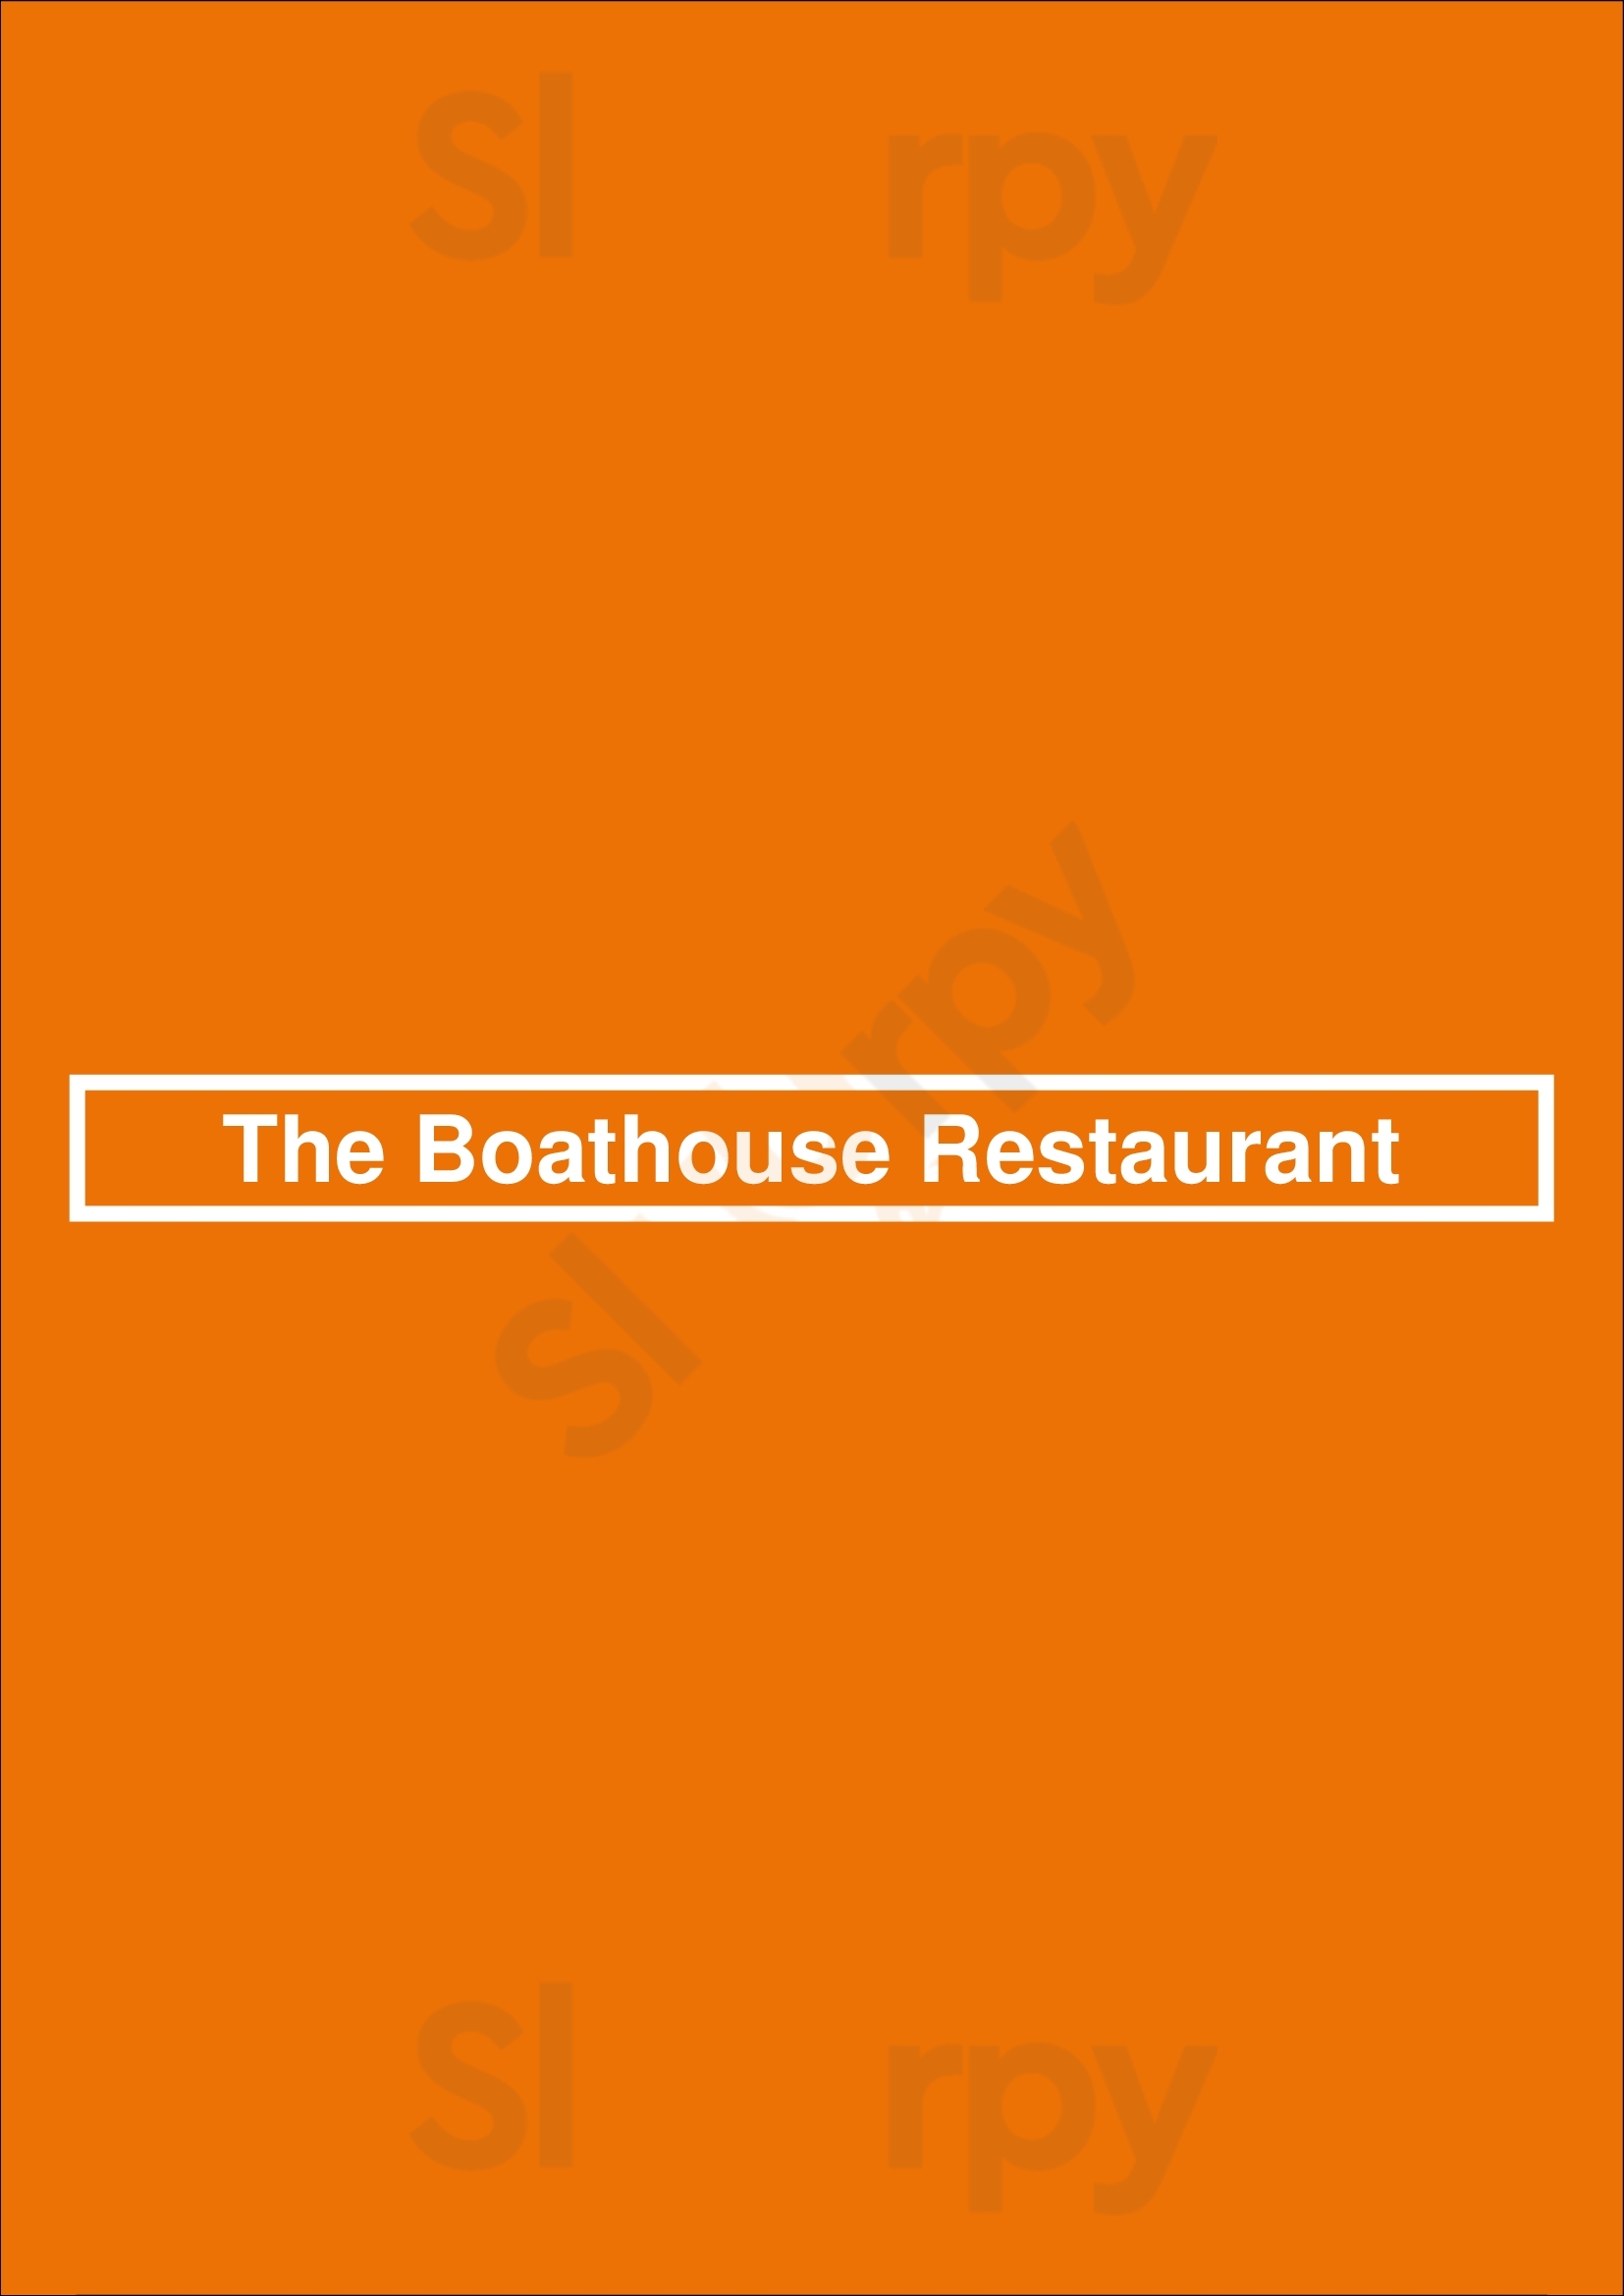 The Boathouse Restaurant New Westminster Menu - 1